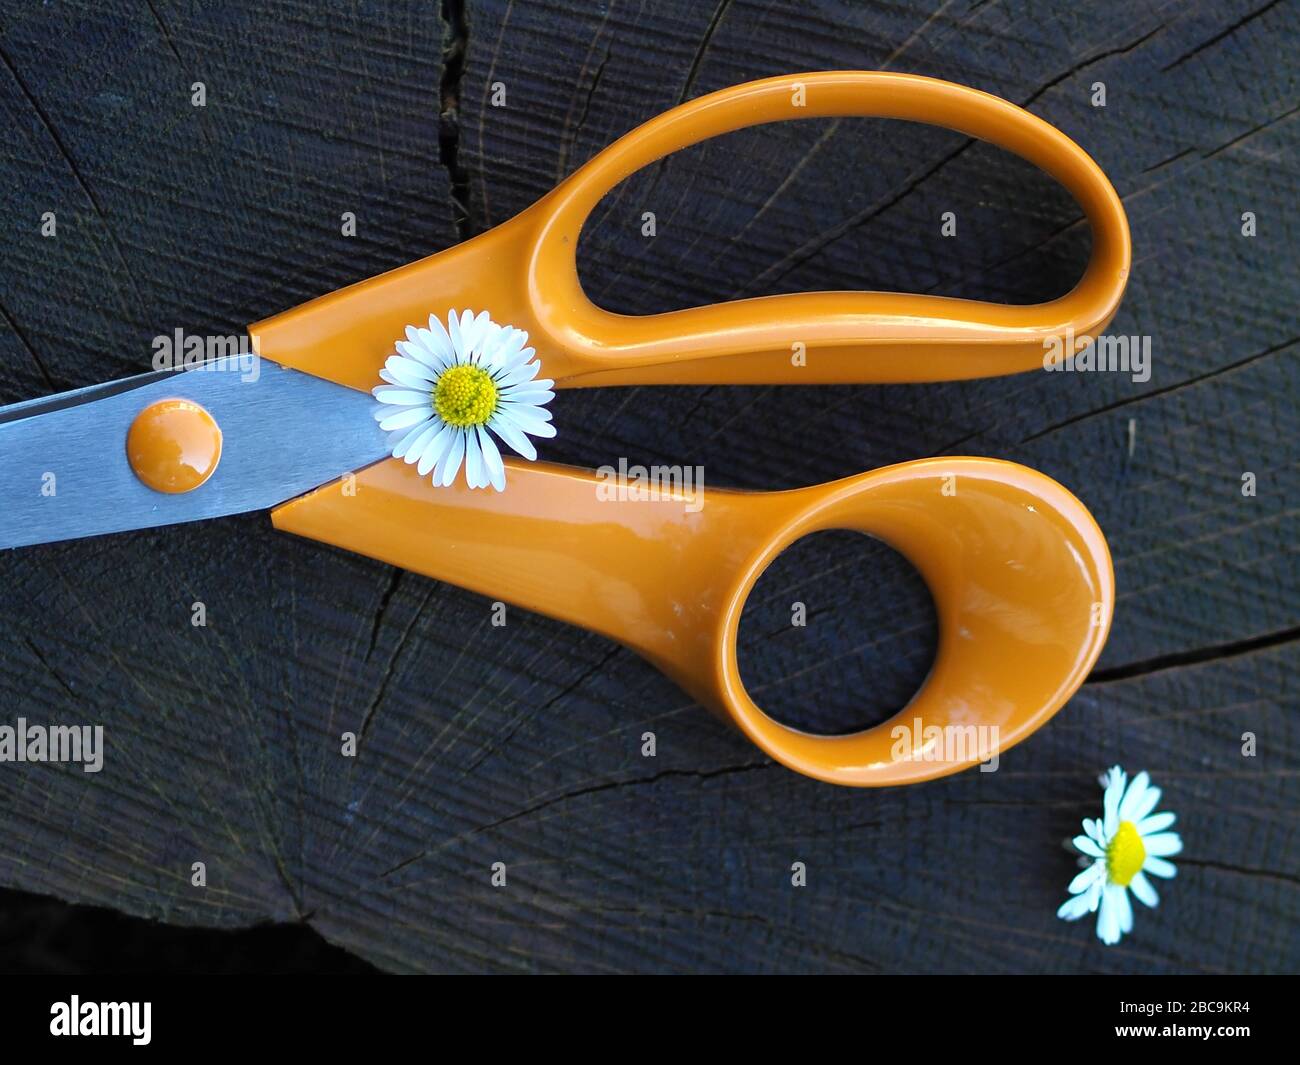 https://c8.alamy.com/comp/2BC9KR4/close-up-of-an-isolated-pair-of-scissors-with-orange-handles-london-england-2BC9KR4.jpg